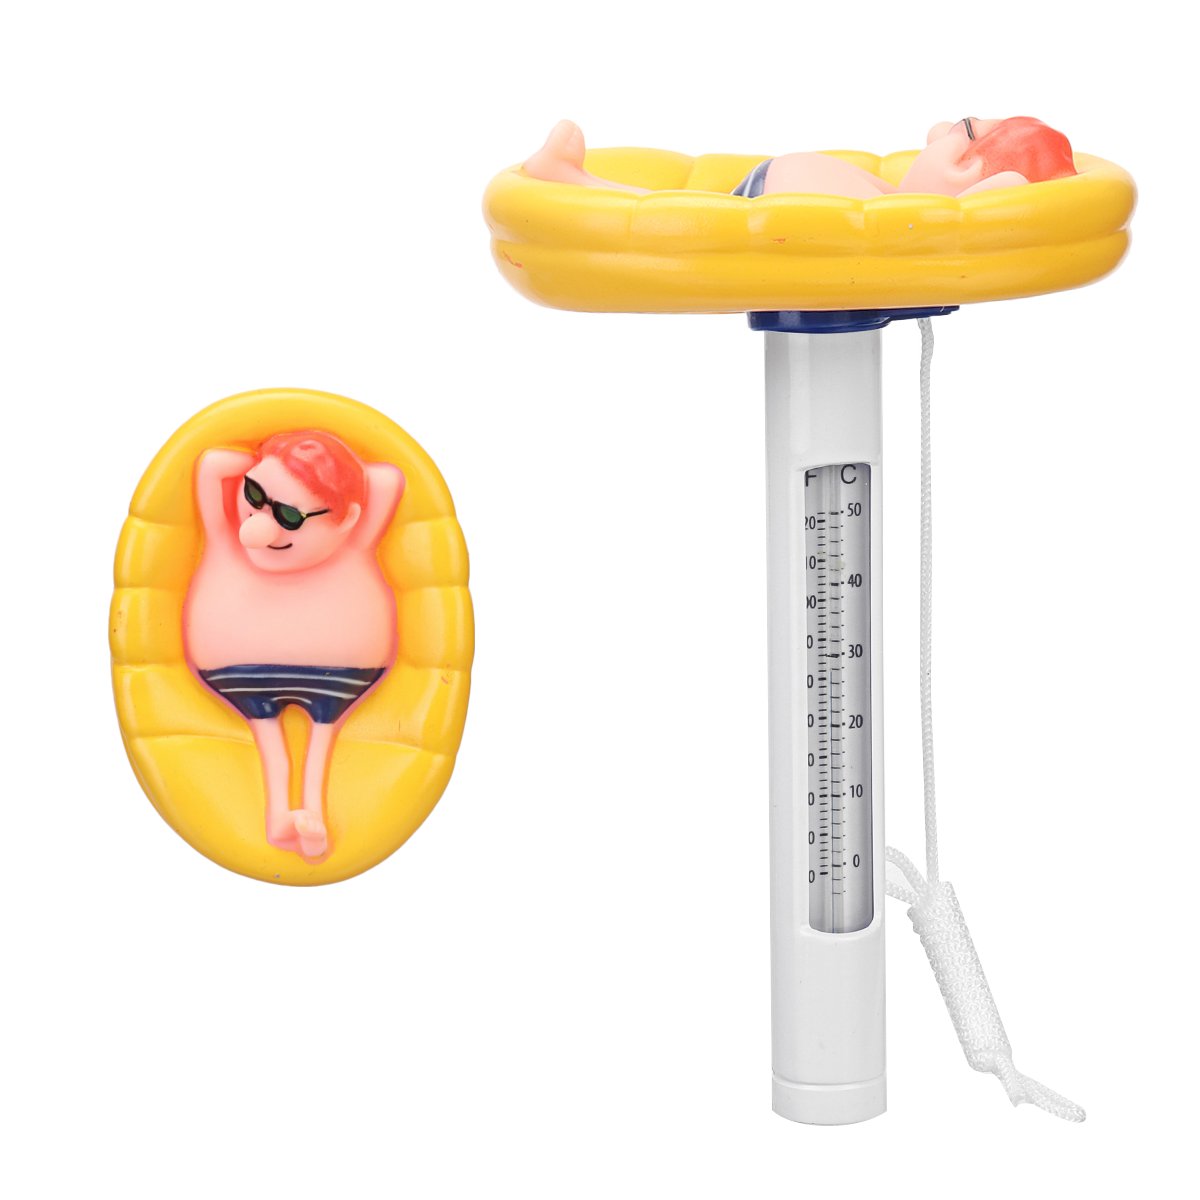 Cartoon-Shatter-Resistant-Floating-Pool-Thermometer-With-String-For-Swimming-Pools-Spas-Hot-Tubs-Wat-1934965-5